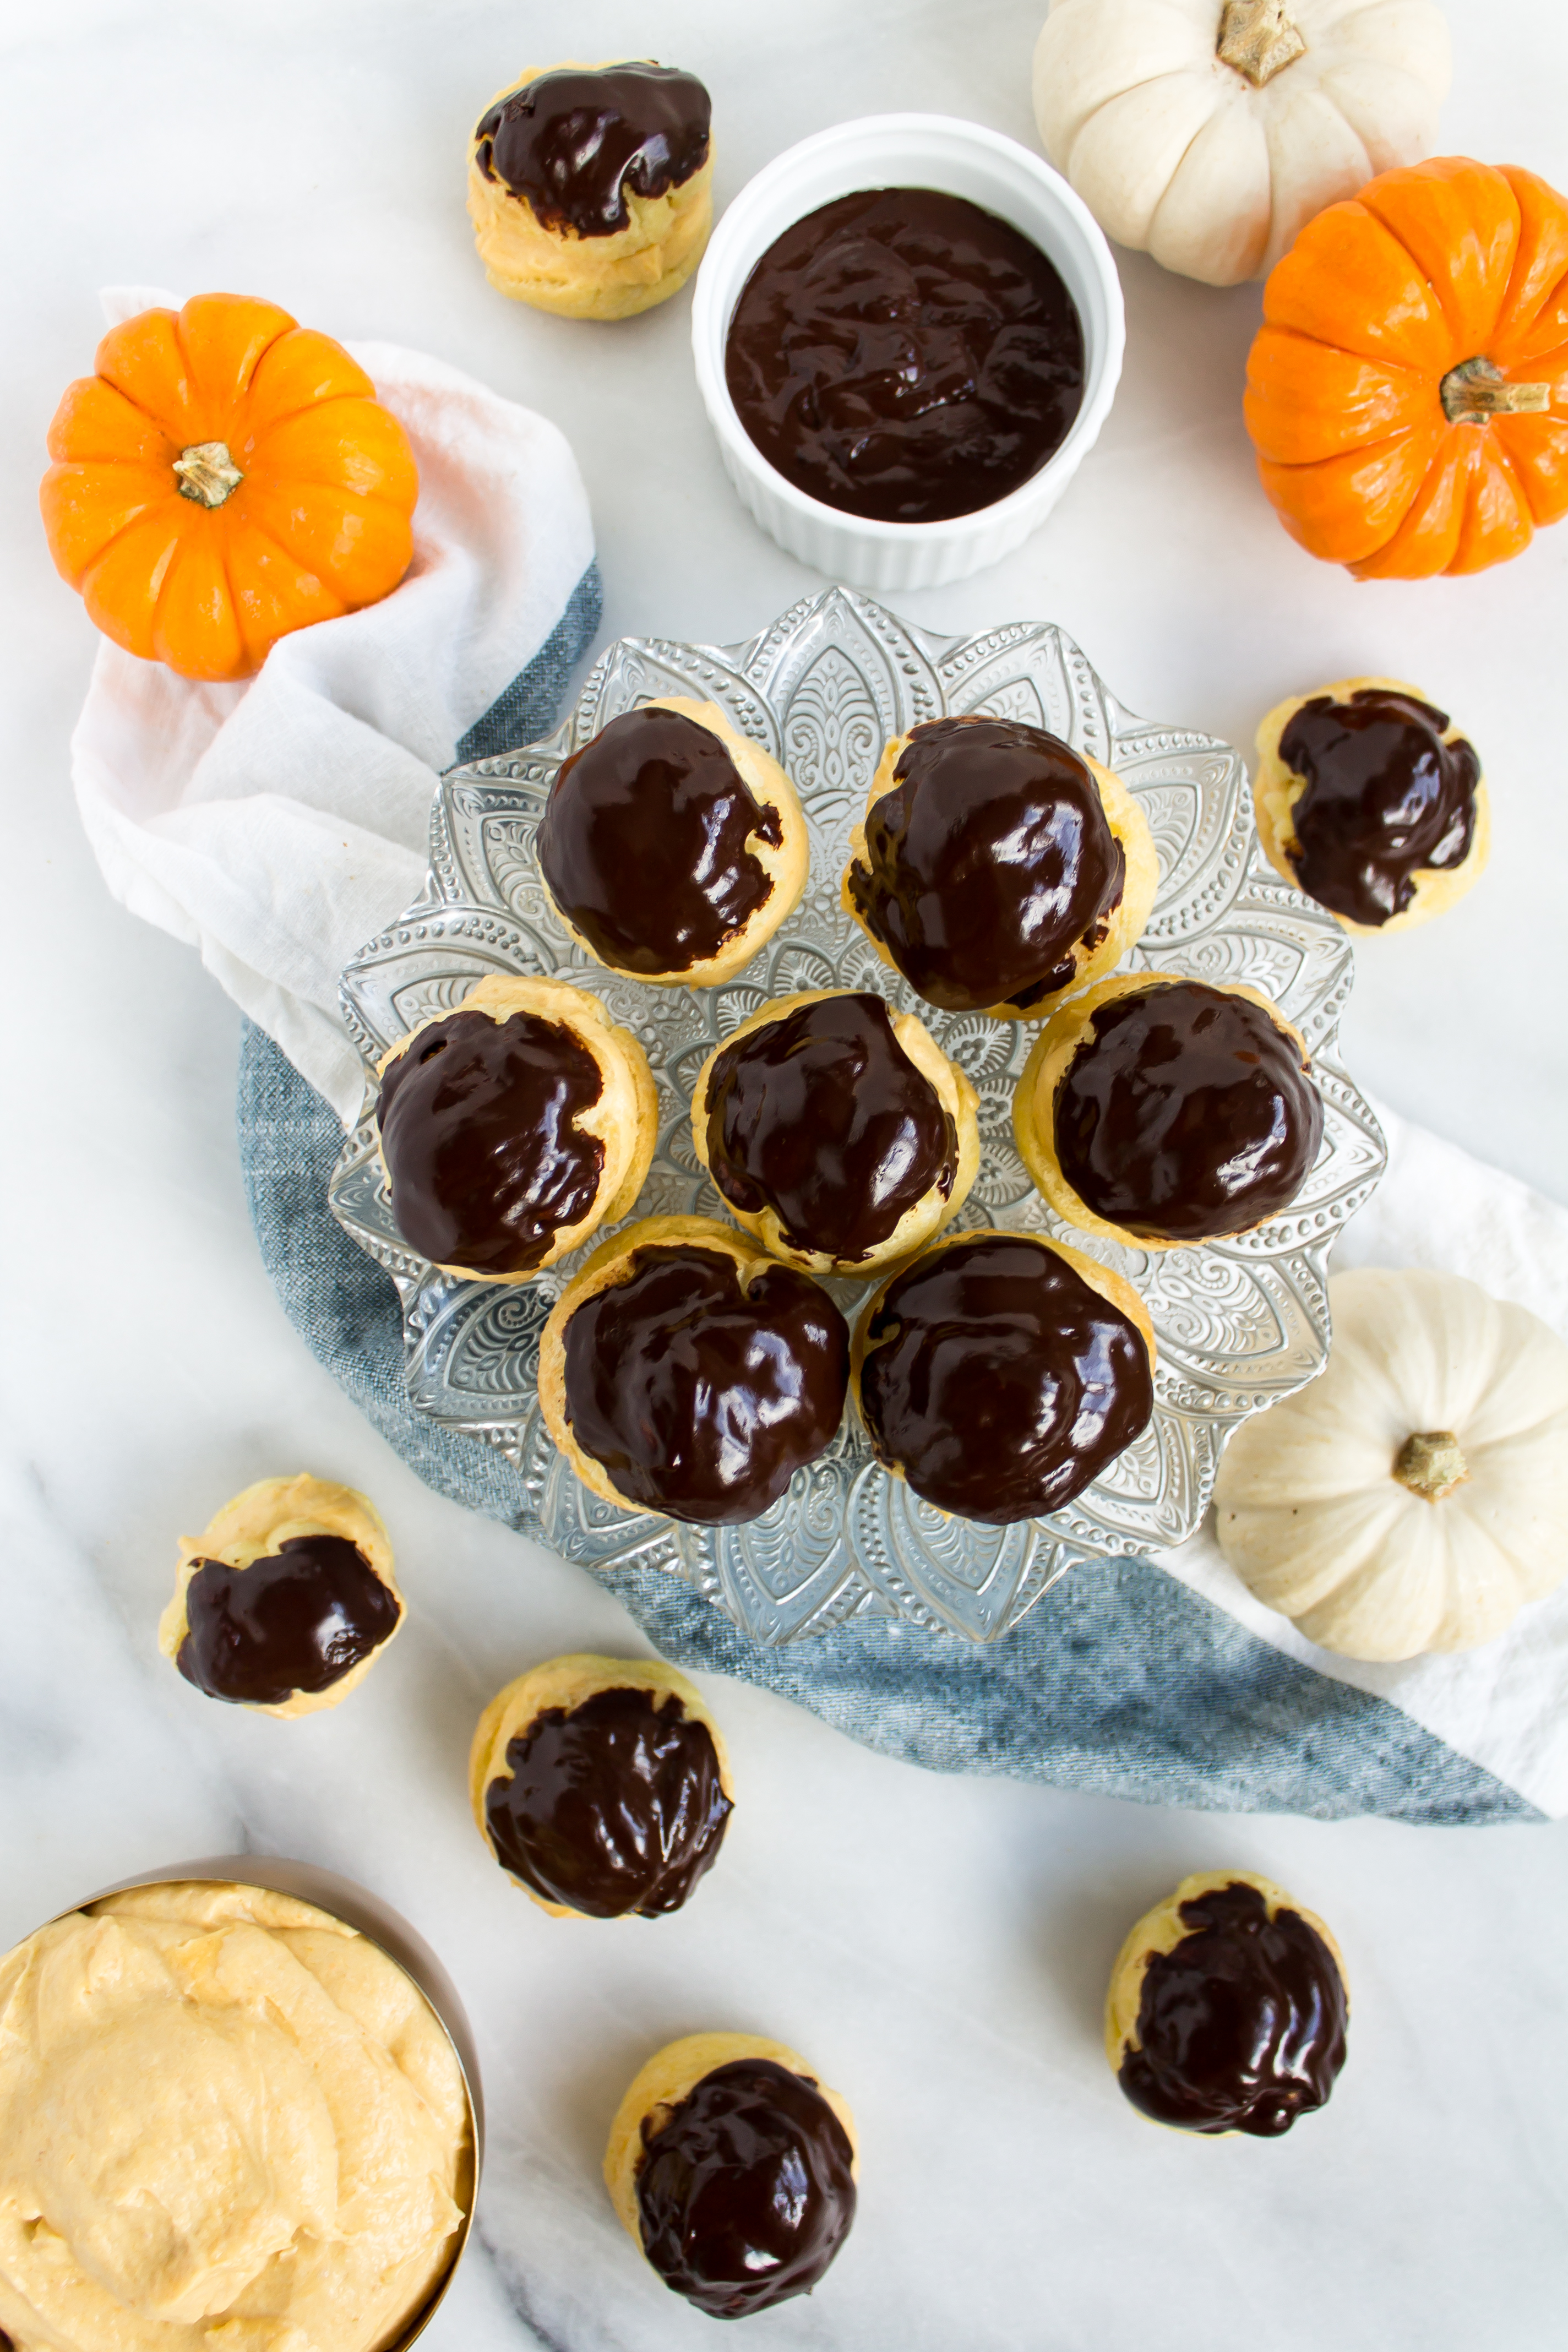 Impress your friends this season with fluffy, delicious pumpkin cream puffs with chocolate ganache. | www.passthecookies.com